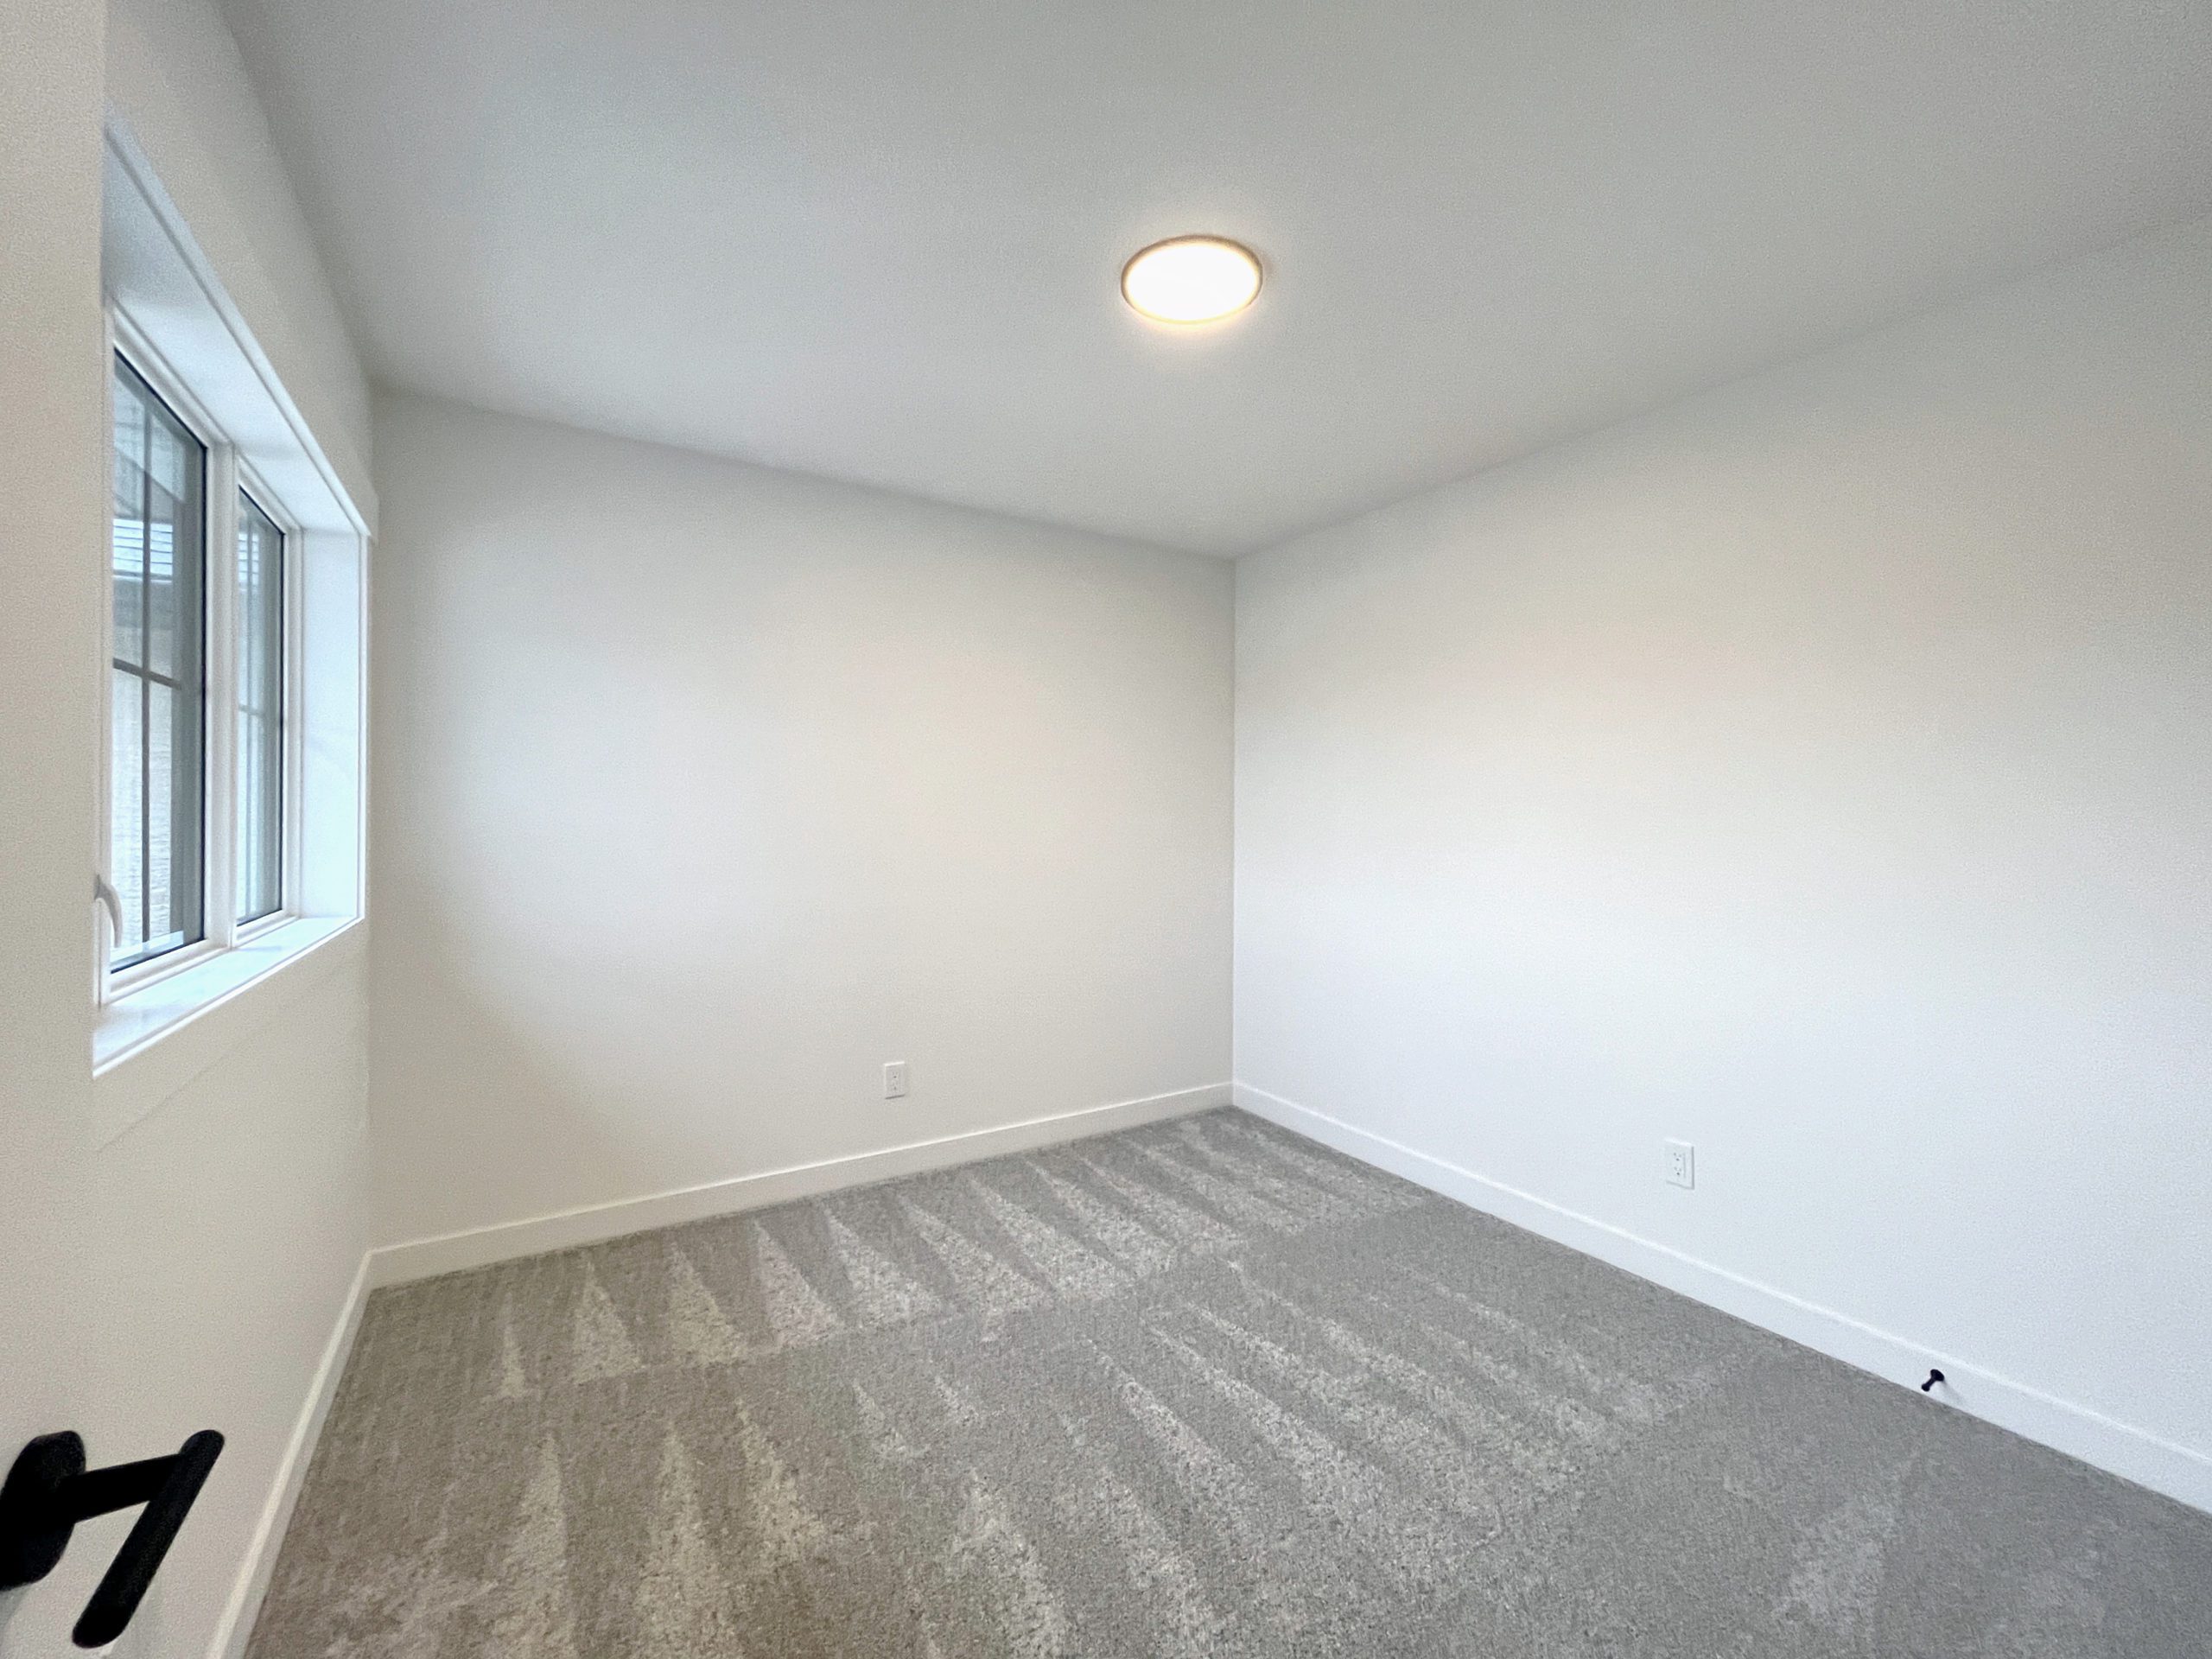 An empty room with a flat profile ceiling fixture with a carpeted floor.